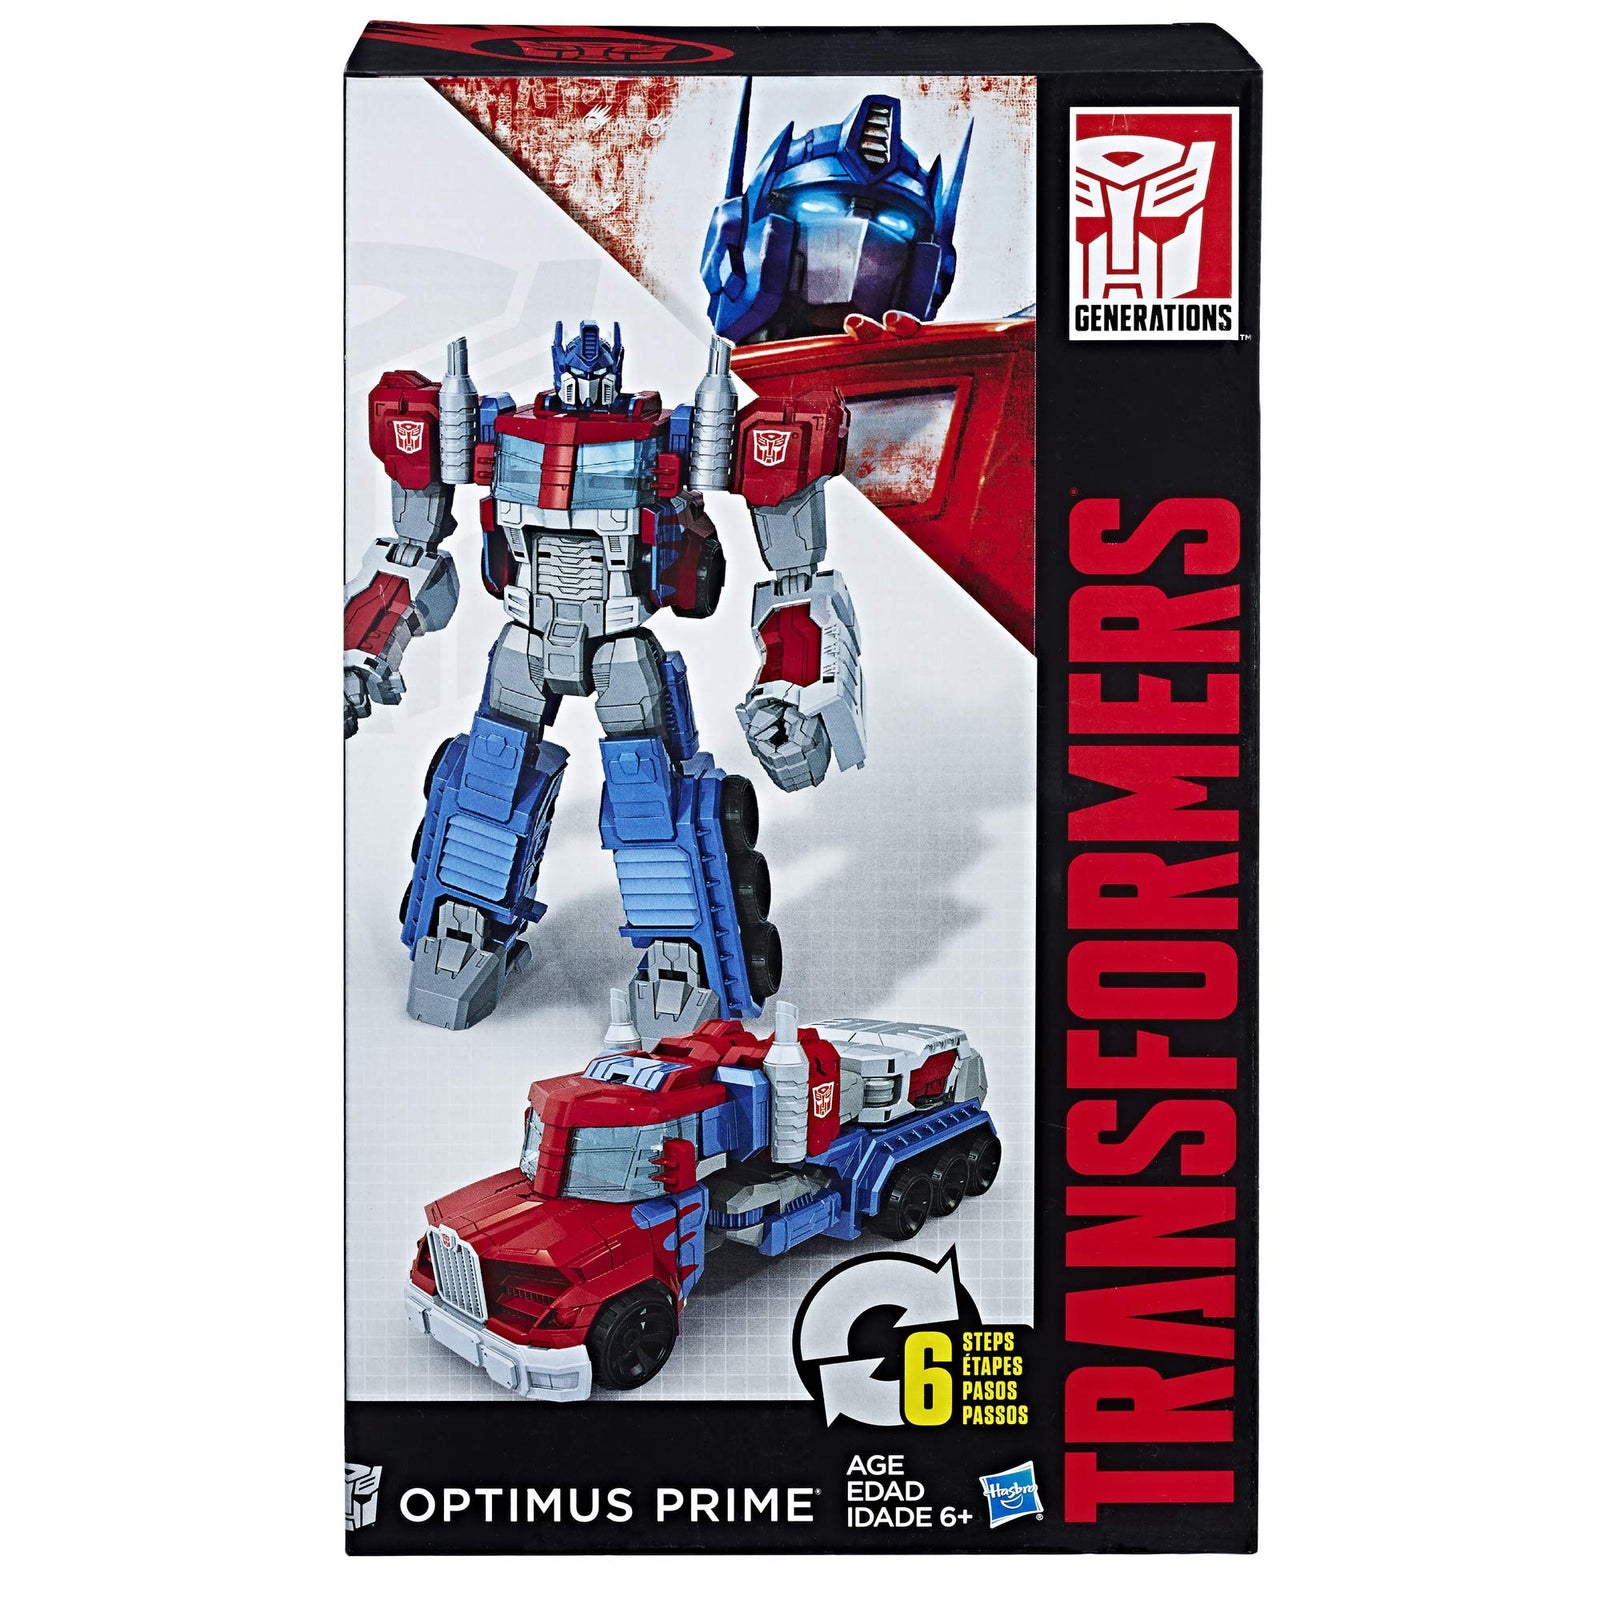 Transformers Toys Heroic Optimus Prime Action Figure - Timeless Large-Scale Figure, Changes into Toy Truck - Toys for Kids 6 and Up, 11-inch(Amazon Exclusive)